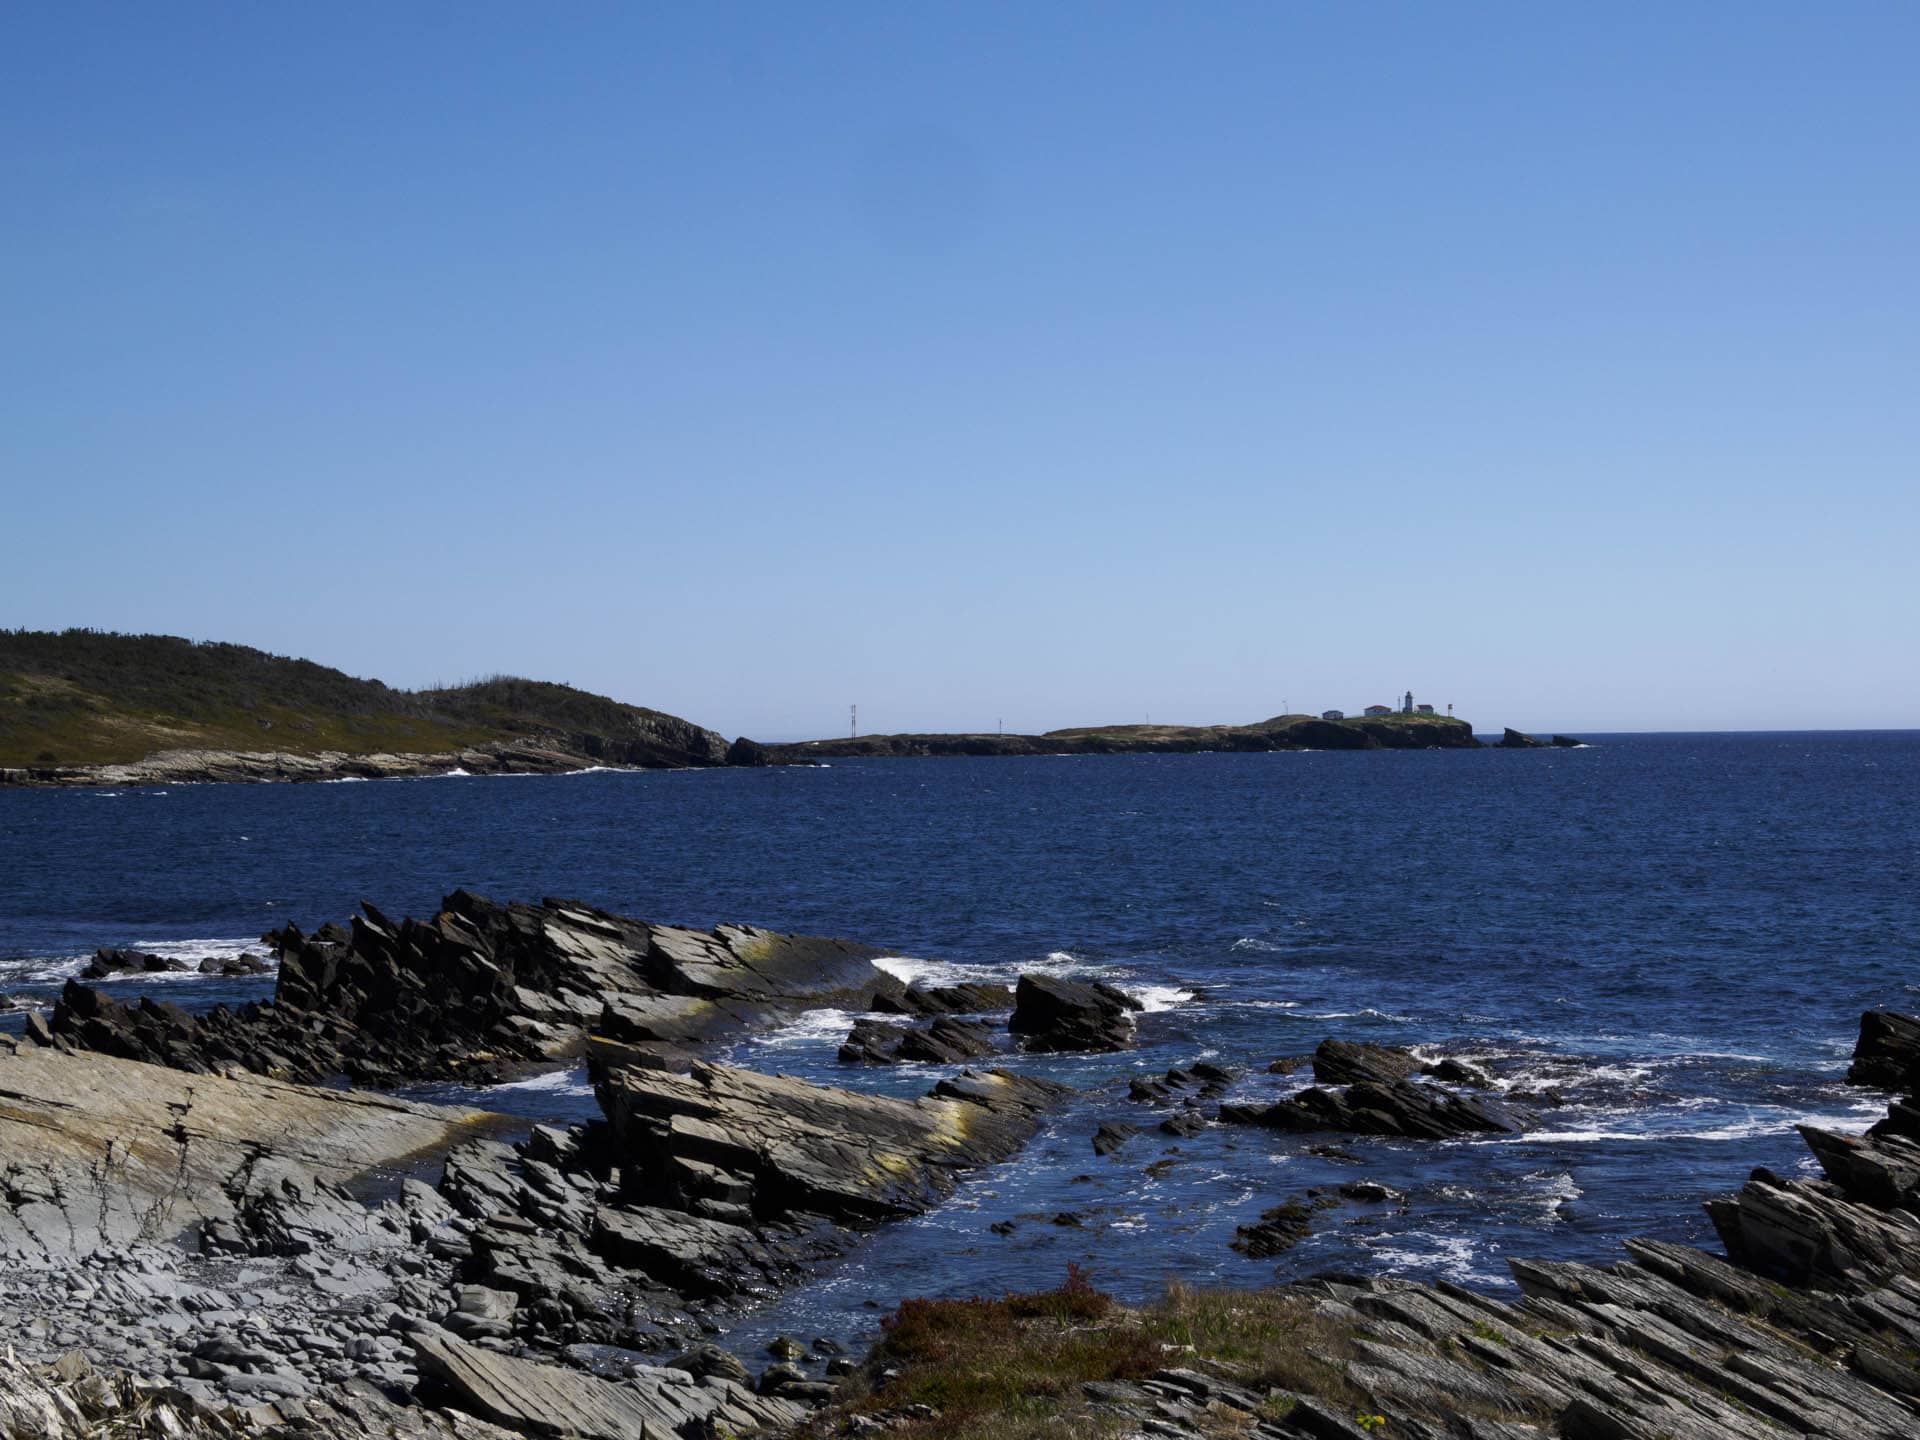 From the lookout platform at about 3.5 km from we started, you have a view of Green Island and its lighthouse in the UNESCO Discovery Global Geopark, one of only 5 in Canada and about 100 in the world